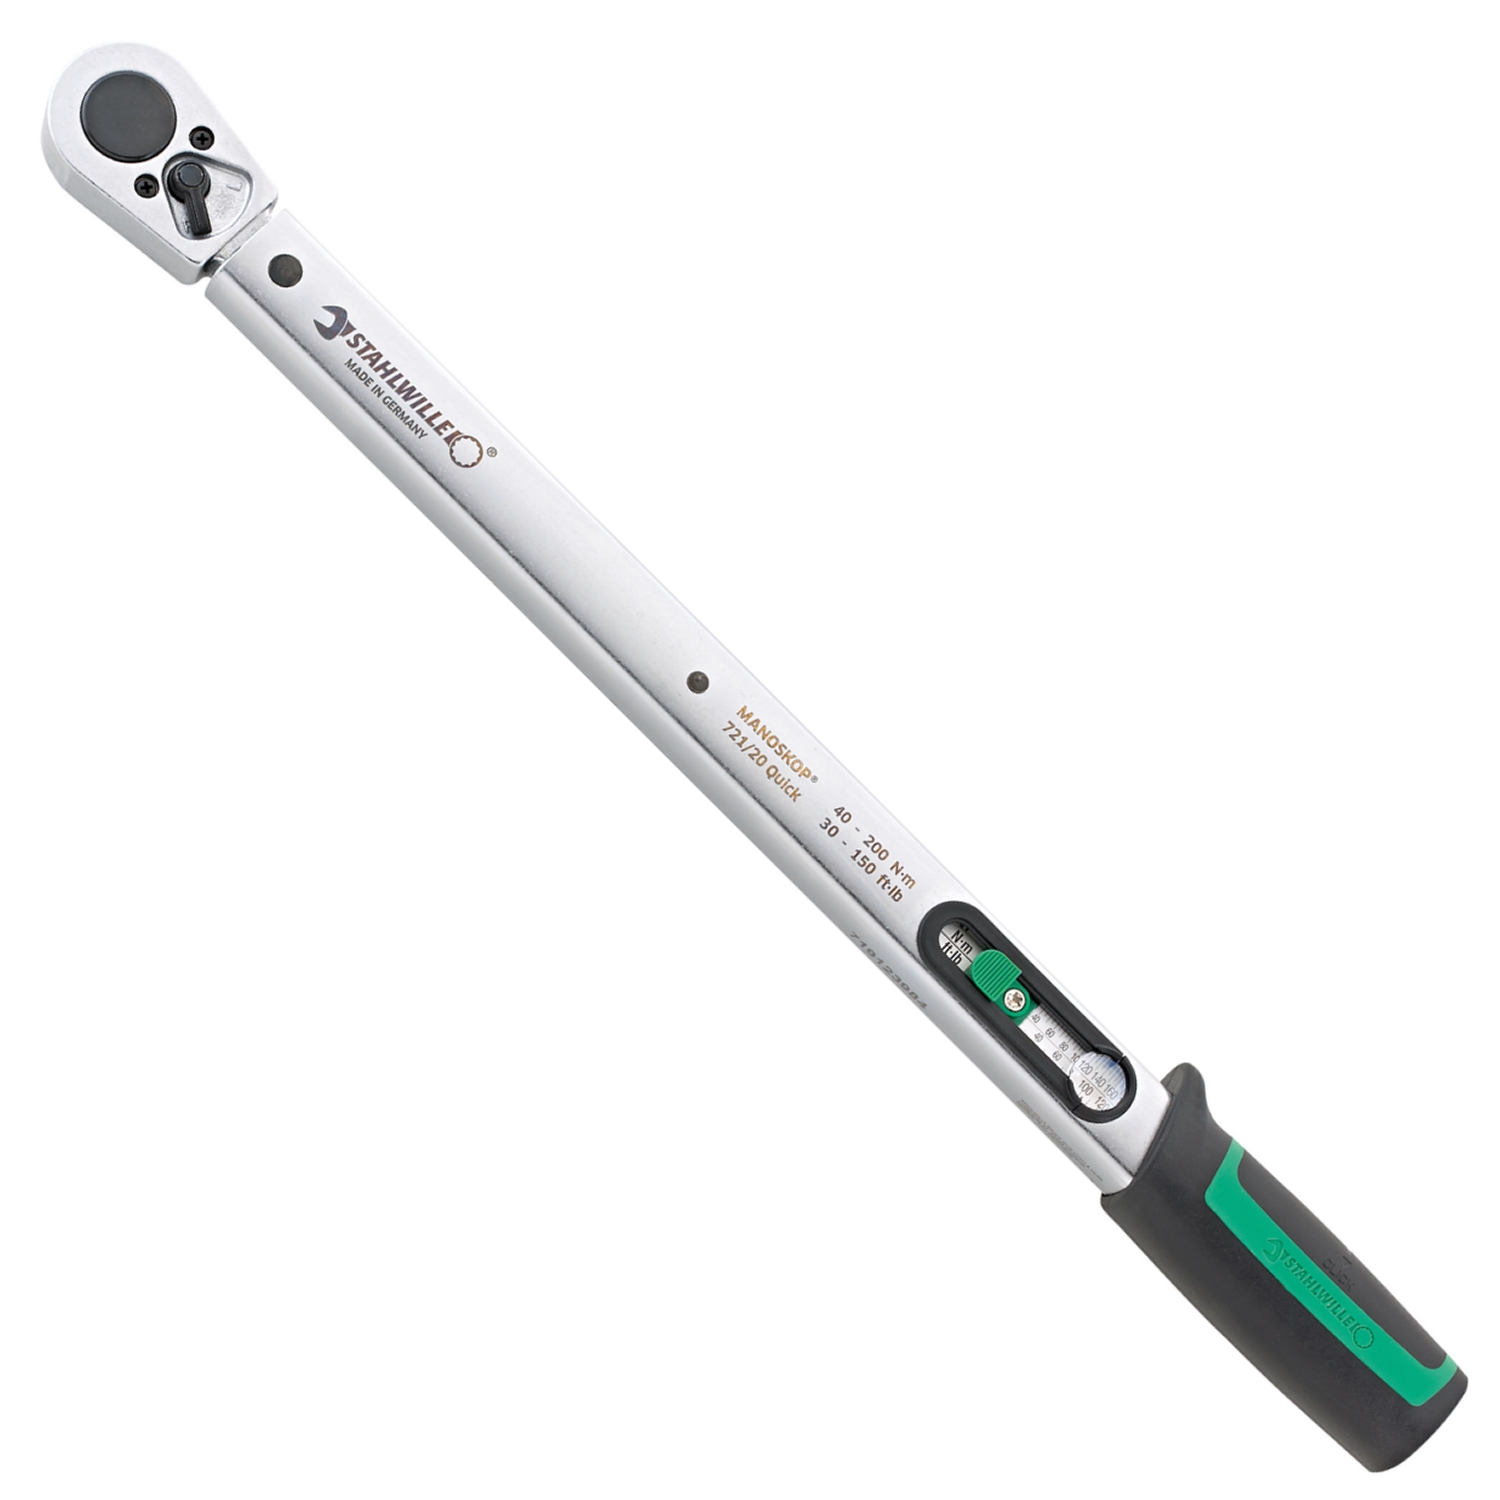 Stahlwille 50204005 3/8-Inch Drive Click-type Torque Wrench w